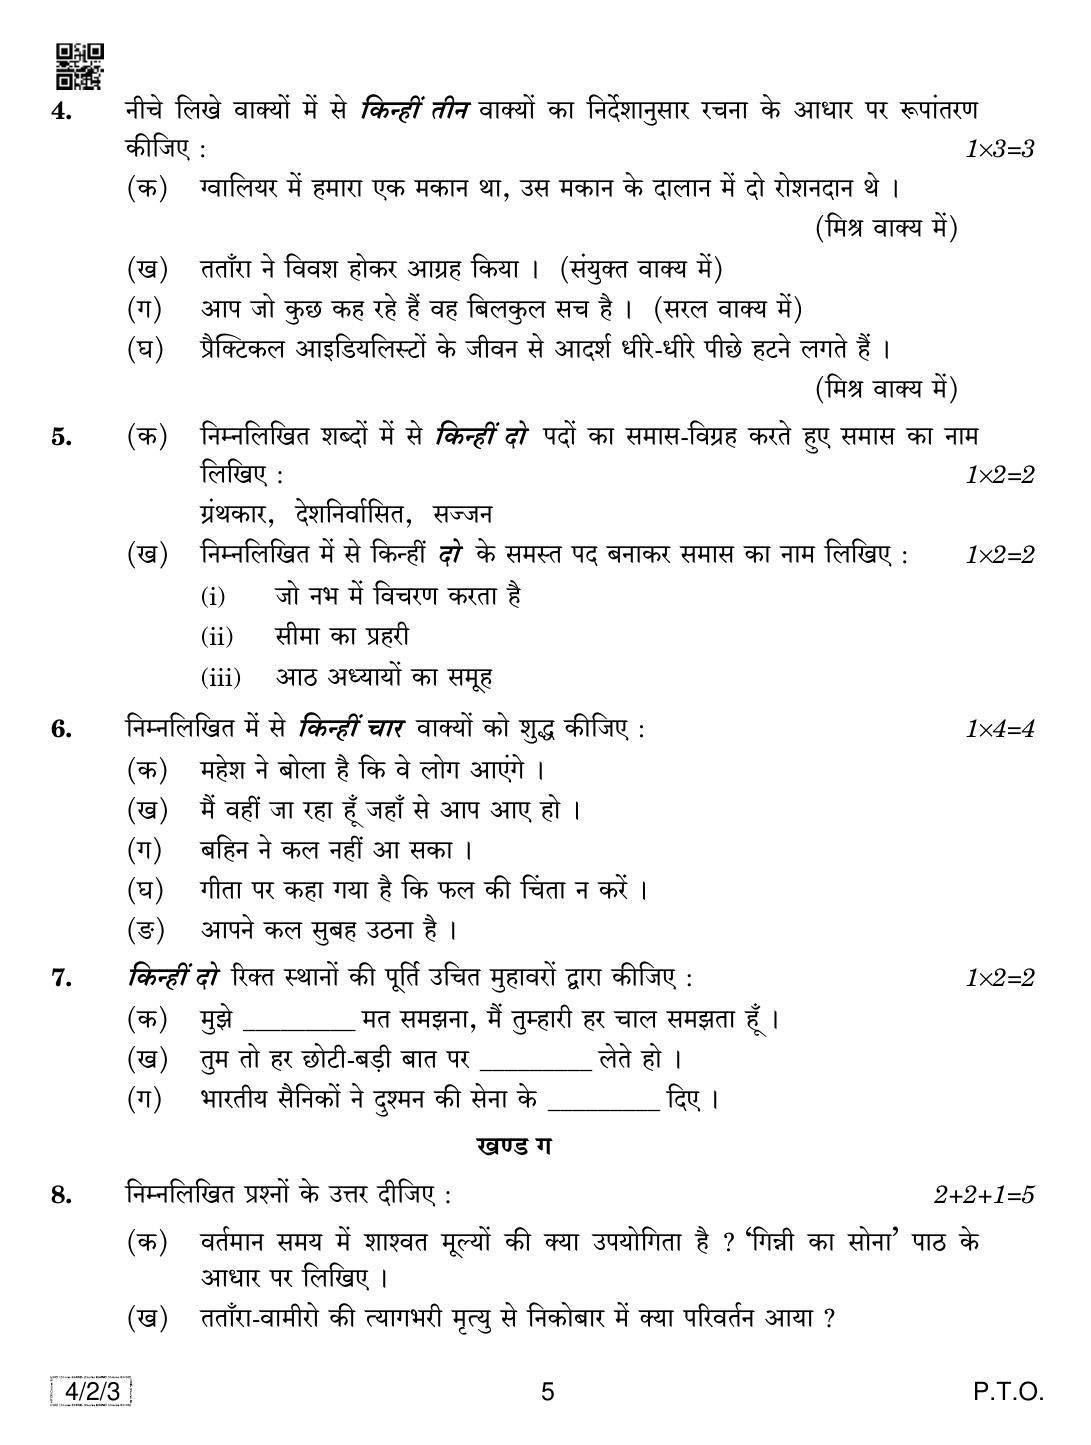 CBSE Class 10 4-2-3 HINDI COURSE- B 2019 Question Paper - Page 5